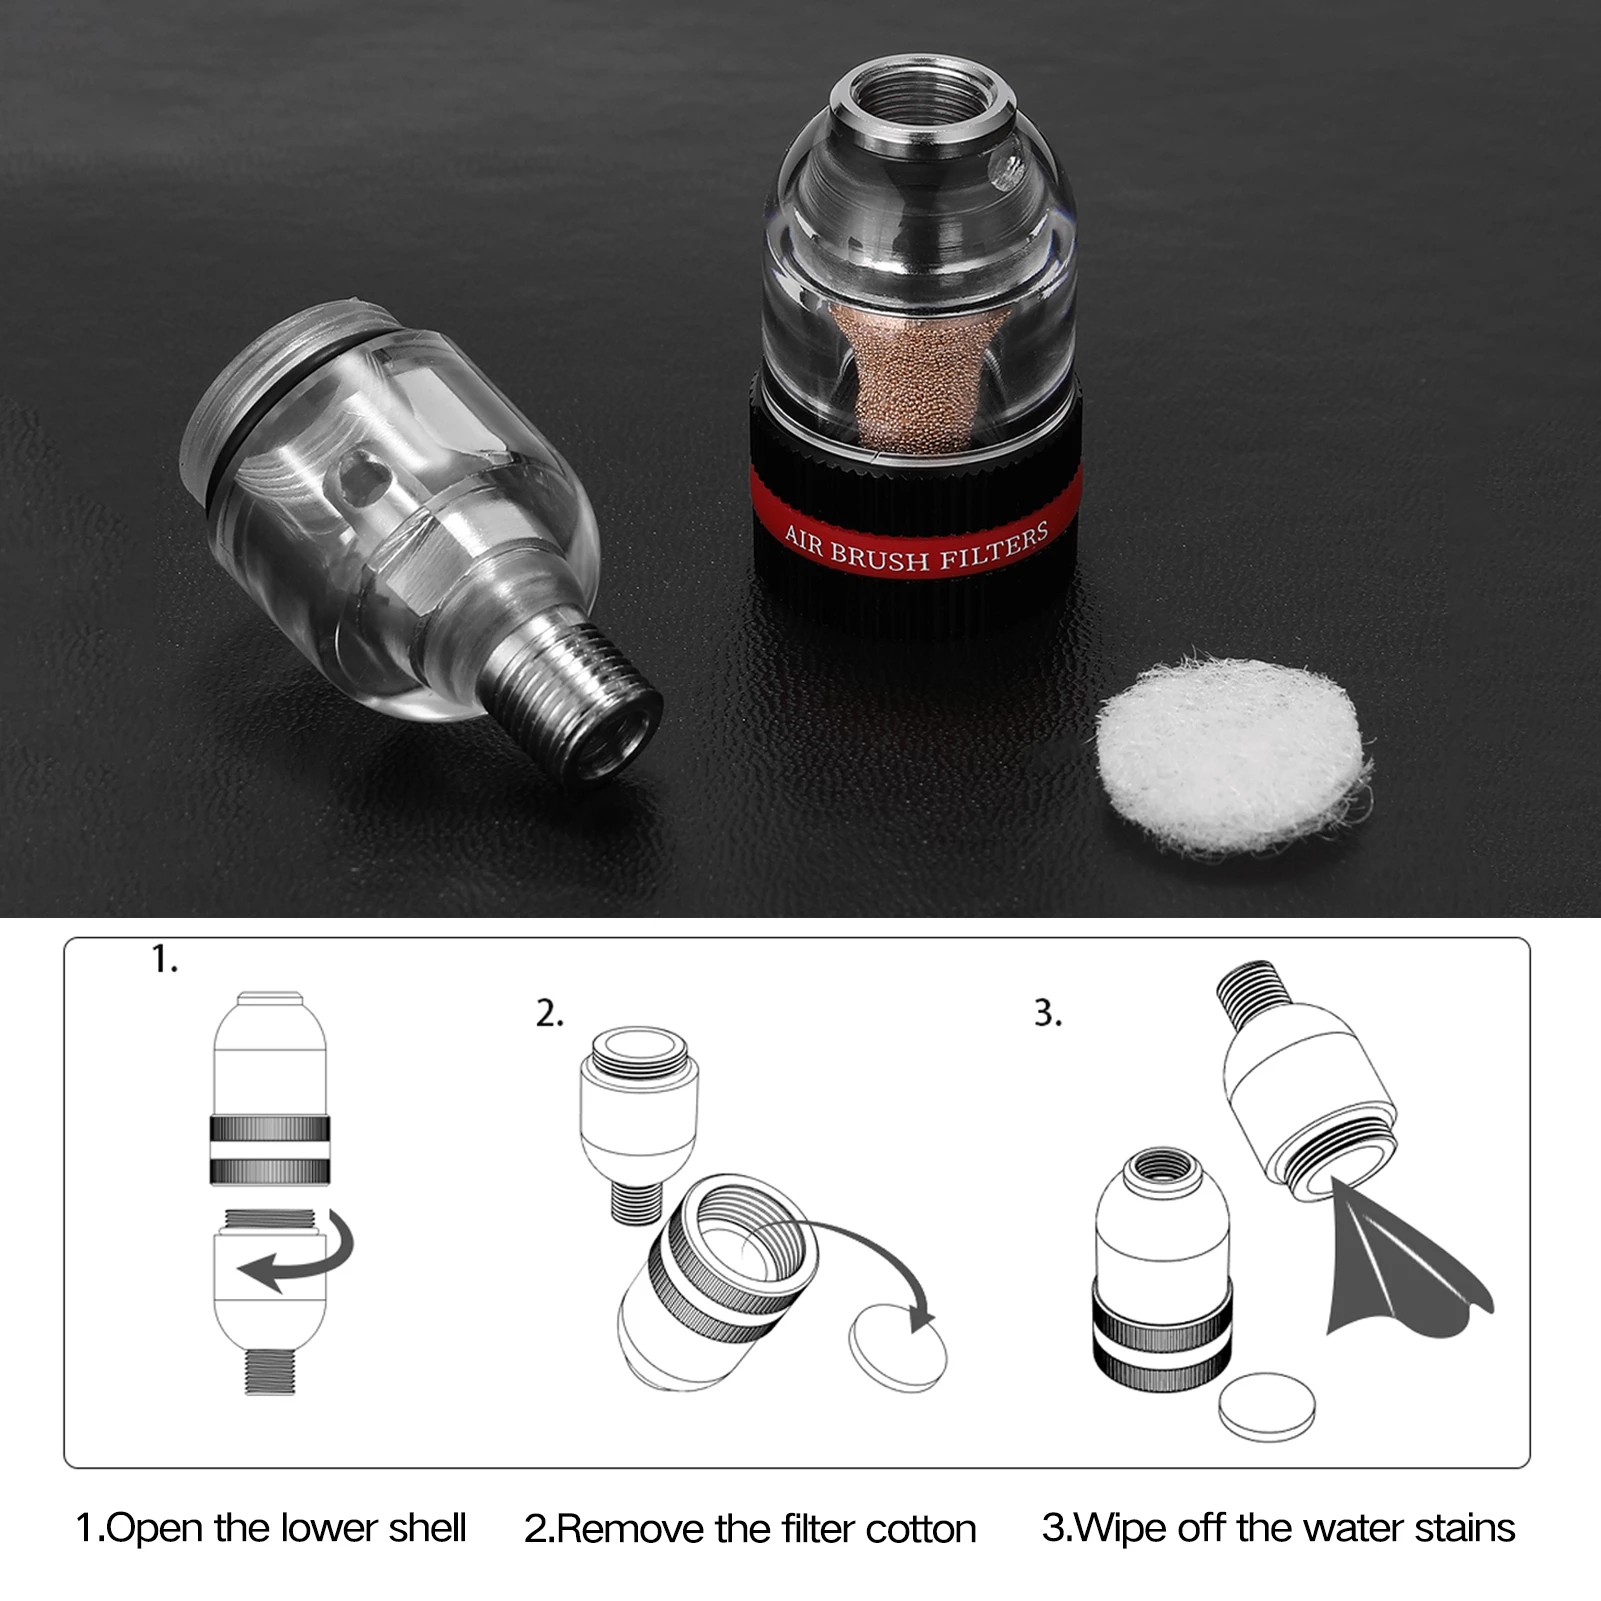 Airbrush-Filters-Spray-Pen-Tail-Water-Air-Separator-Strainer-Little-Water-Separator-Air-Brush-Filter-1823655-2